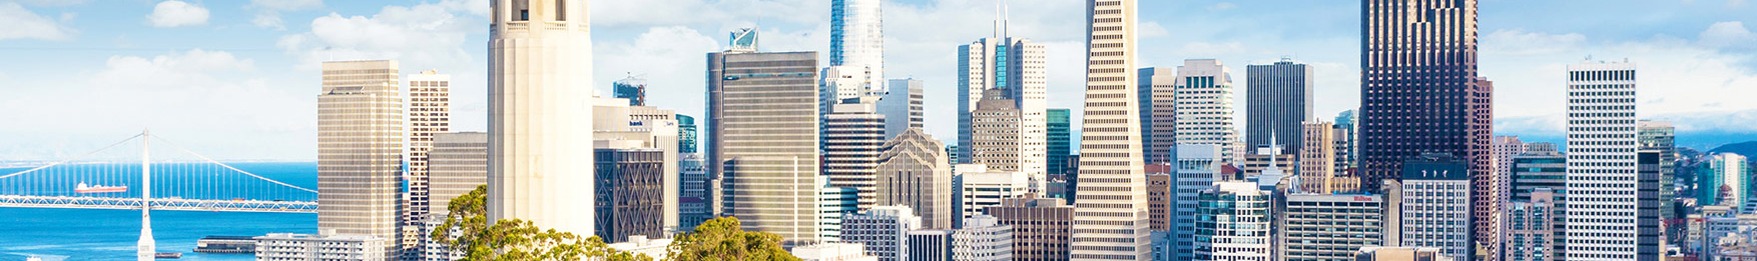 Skyline city view, where some may need a San Francisco personal injury lawyer